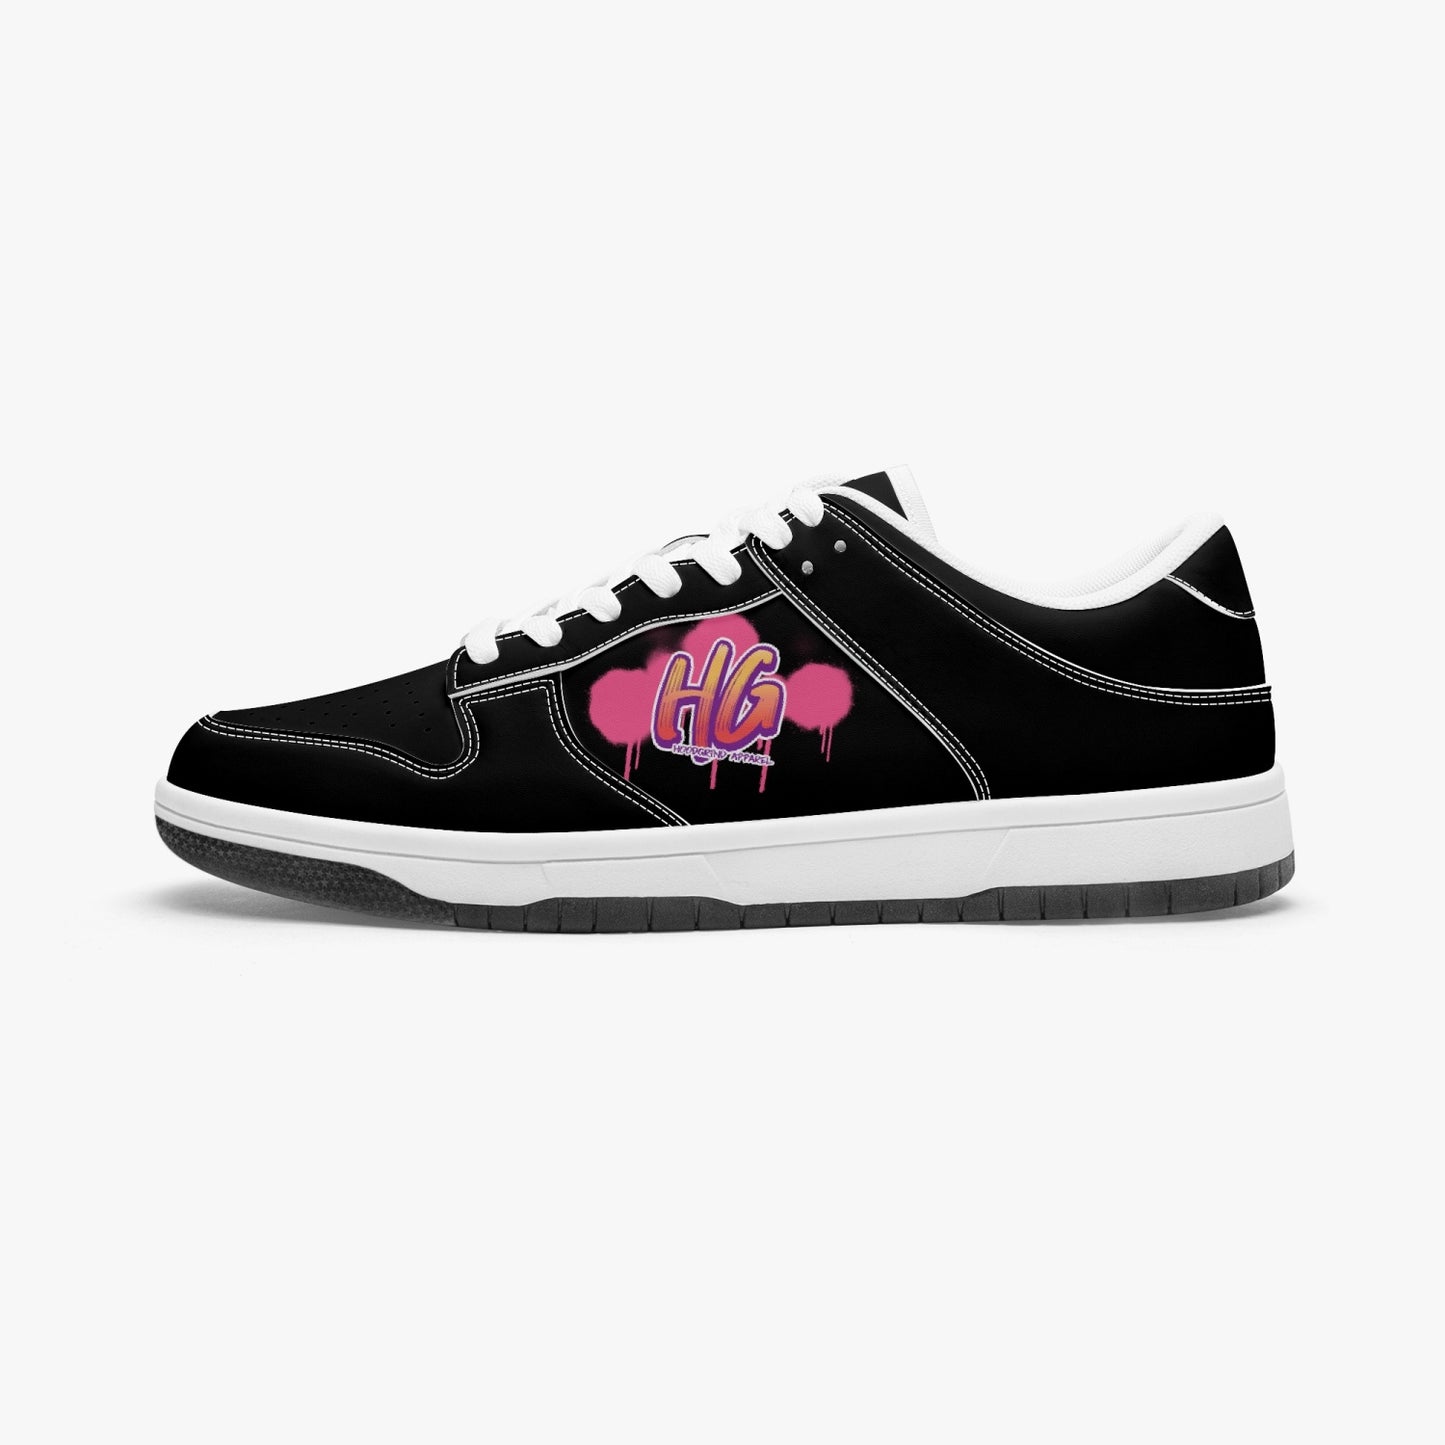 HOODGRIND Dunk Stylish Low-Top Leather Sneakers